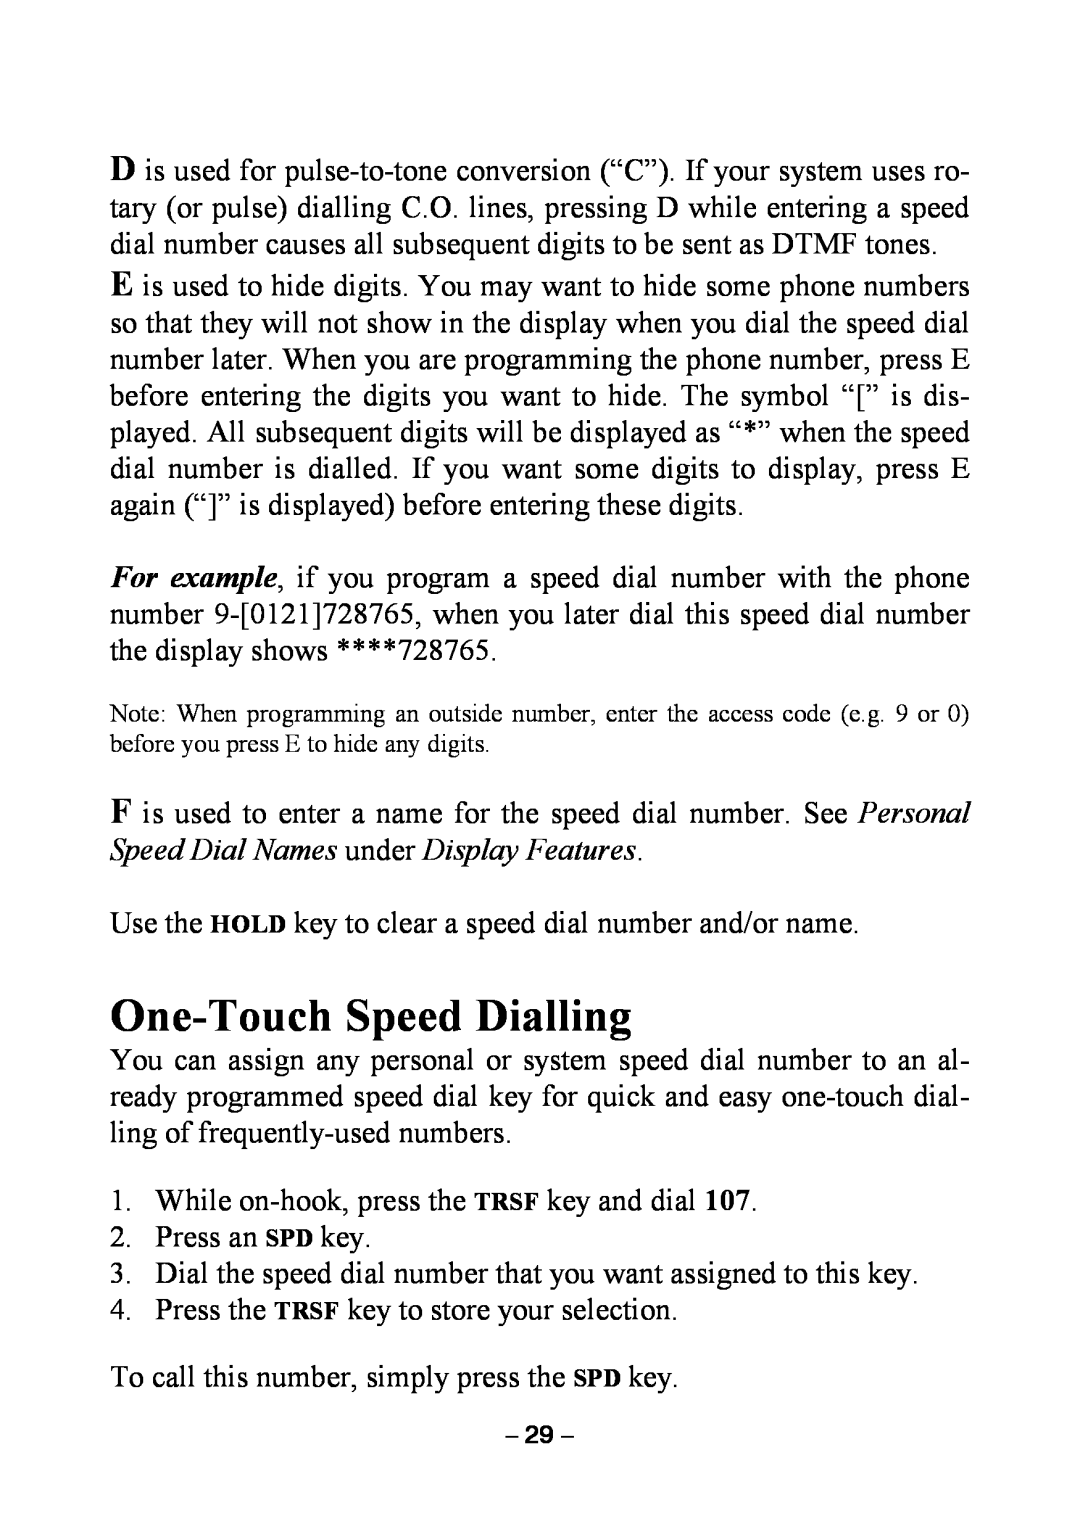 Samsung DCS KEYSET manual One-Touch Speed Dialling 